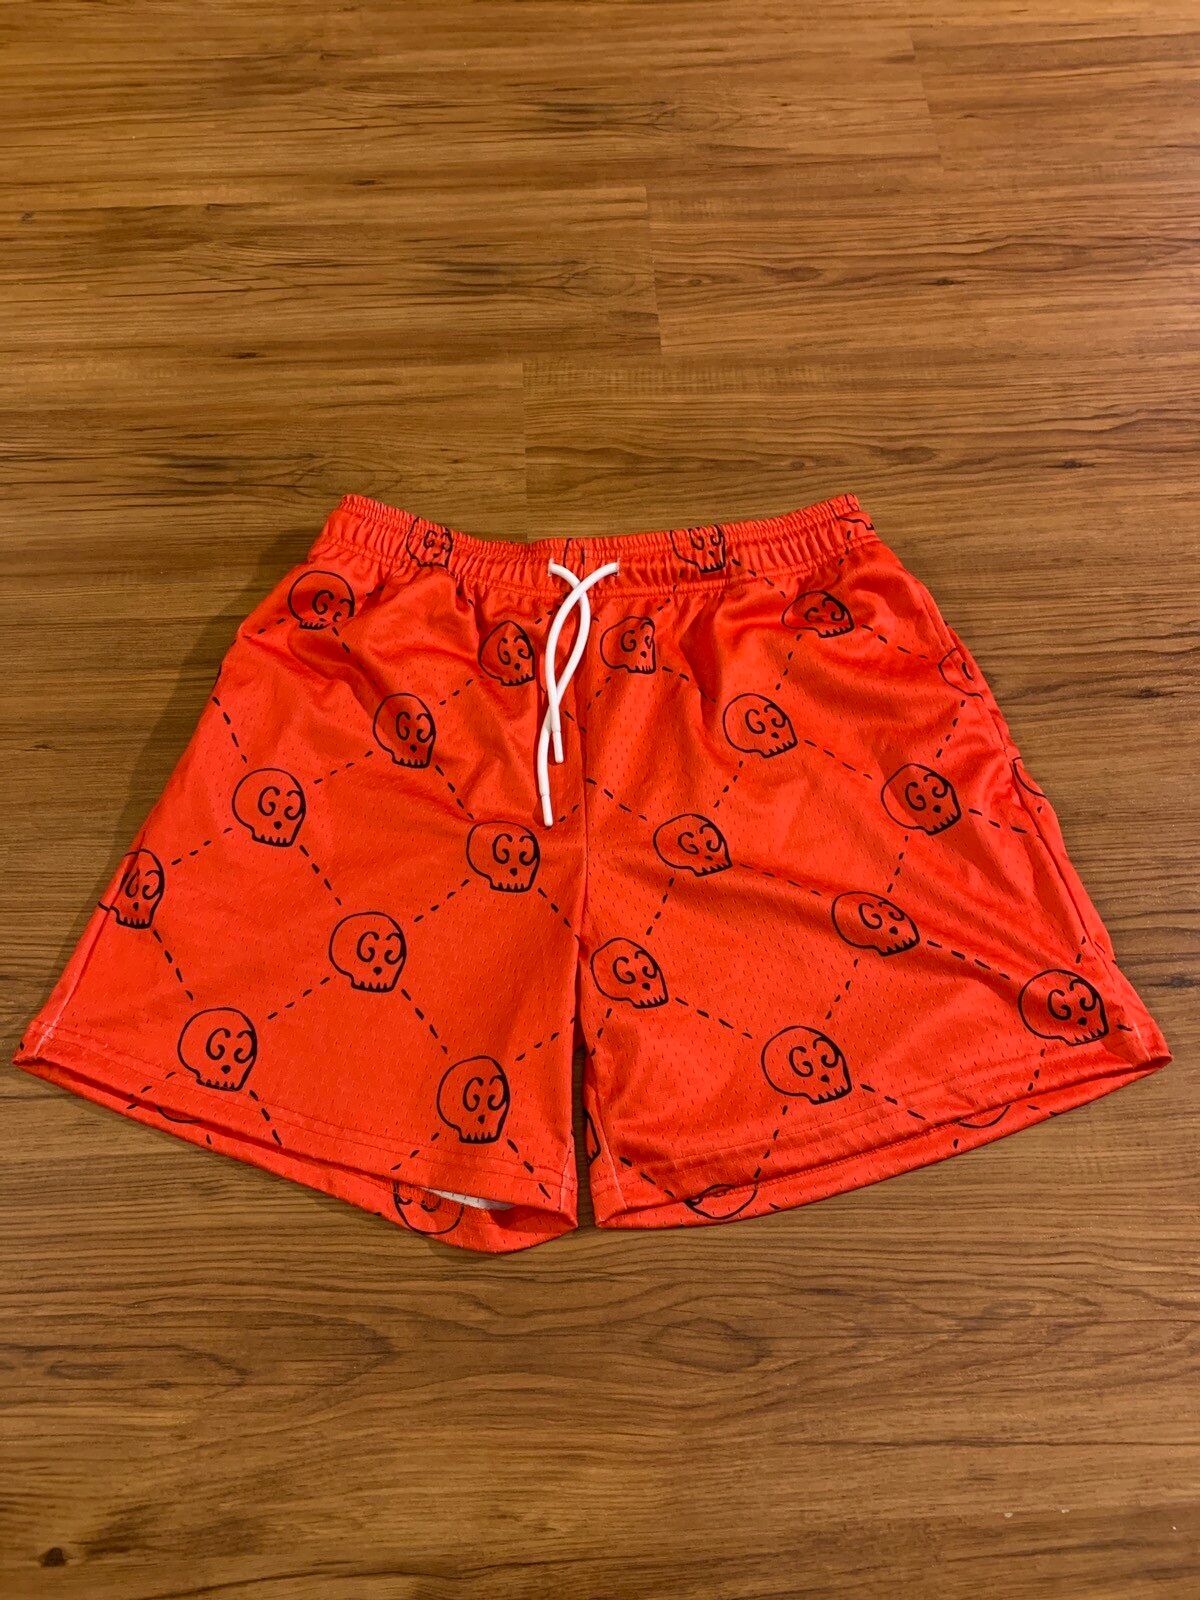 Streetwear Mr Remade Shorts | Grailed